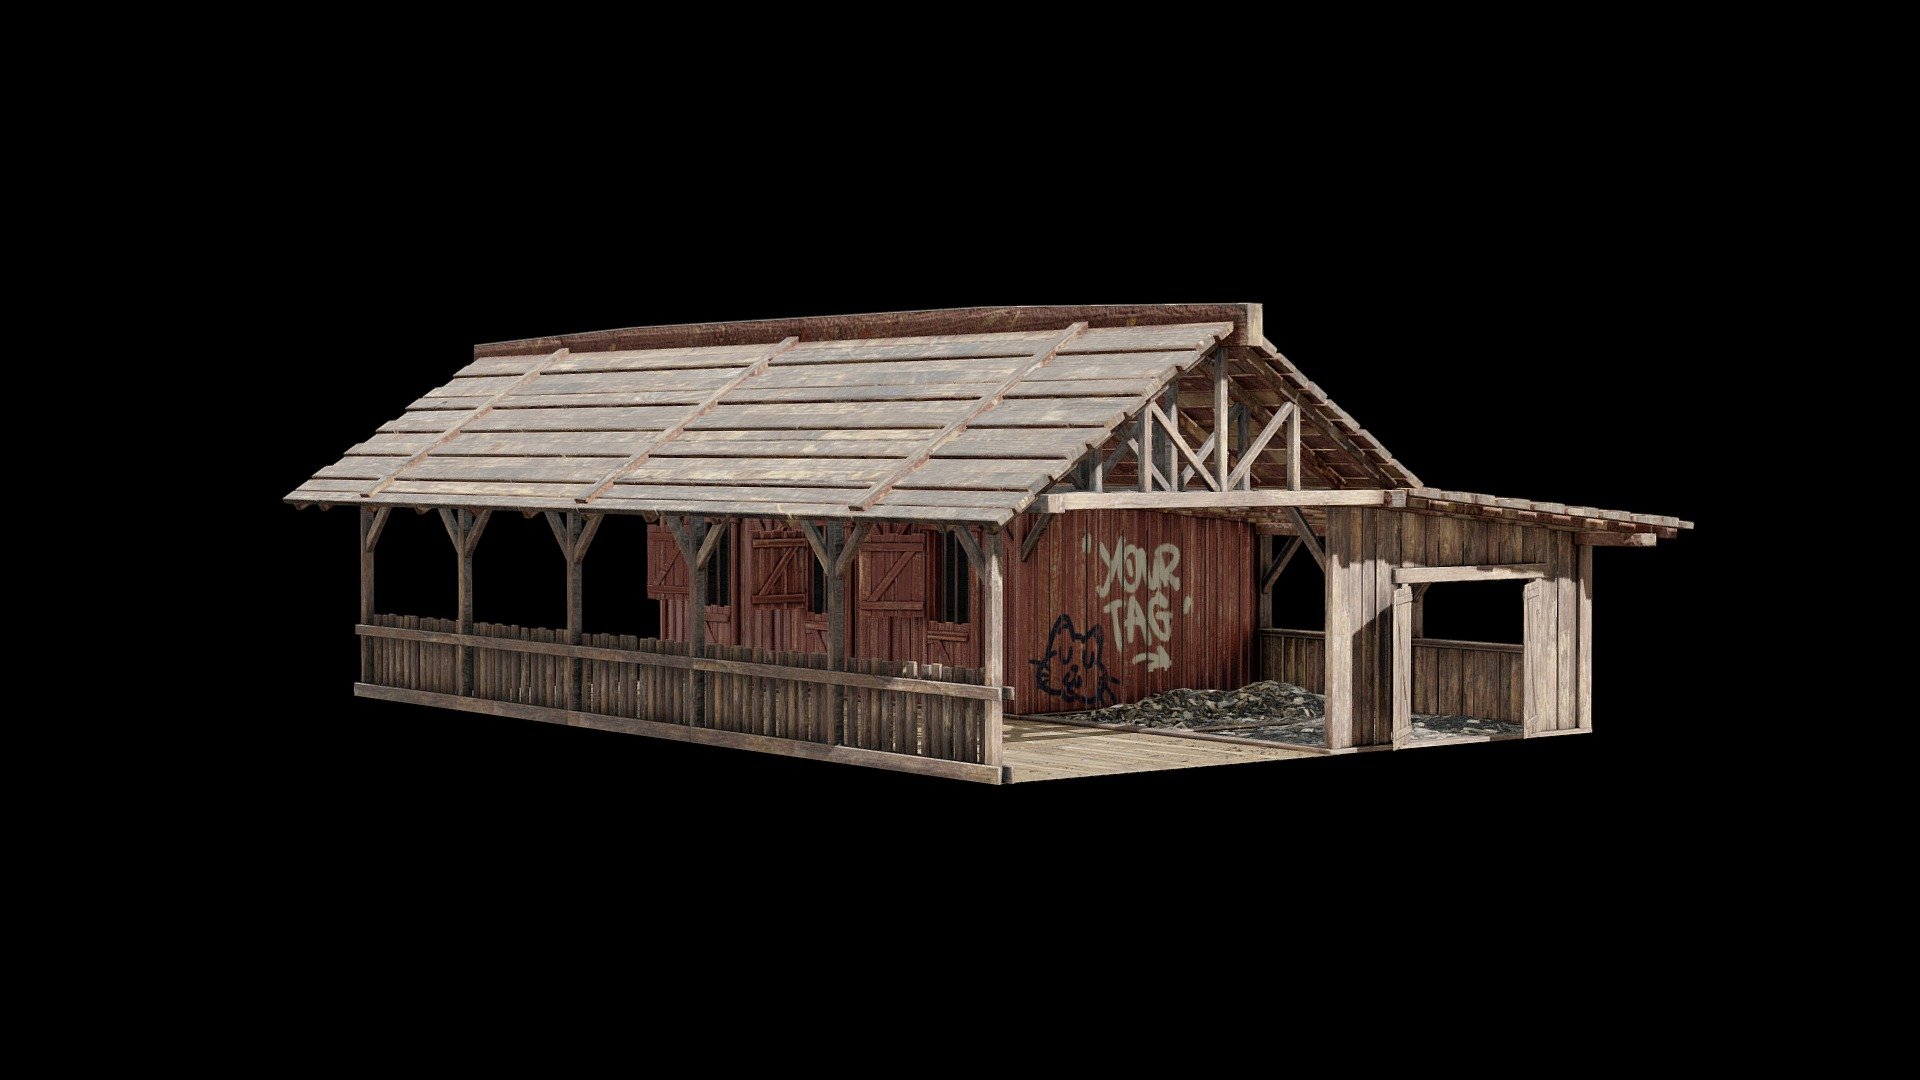 Free download：www.freepoly.org
If you like,Buy me a coffee maybe? https://www.buymeacoffee.com/riveryang - Wood House-Freepoly.org - Download Free 3D model by Freepoly.org (@blackrray) 3d model